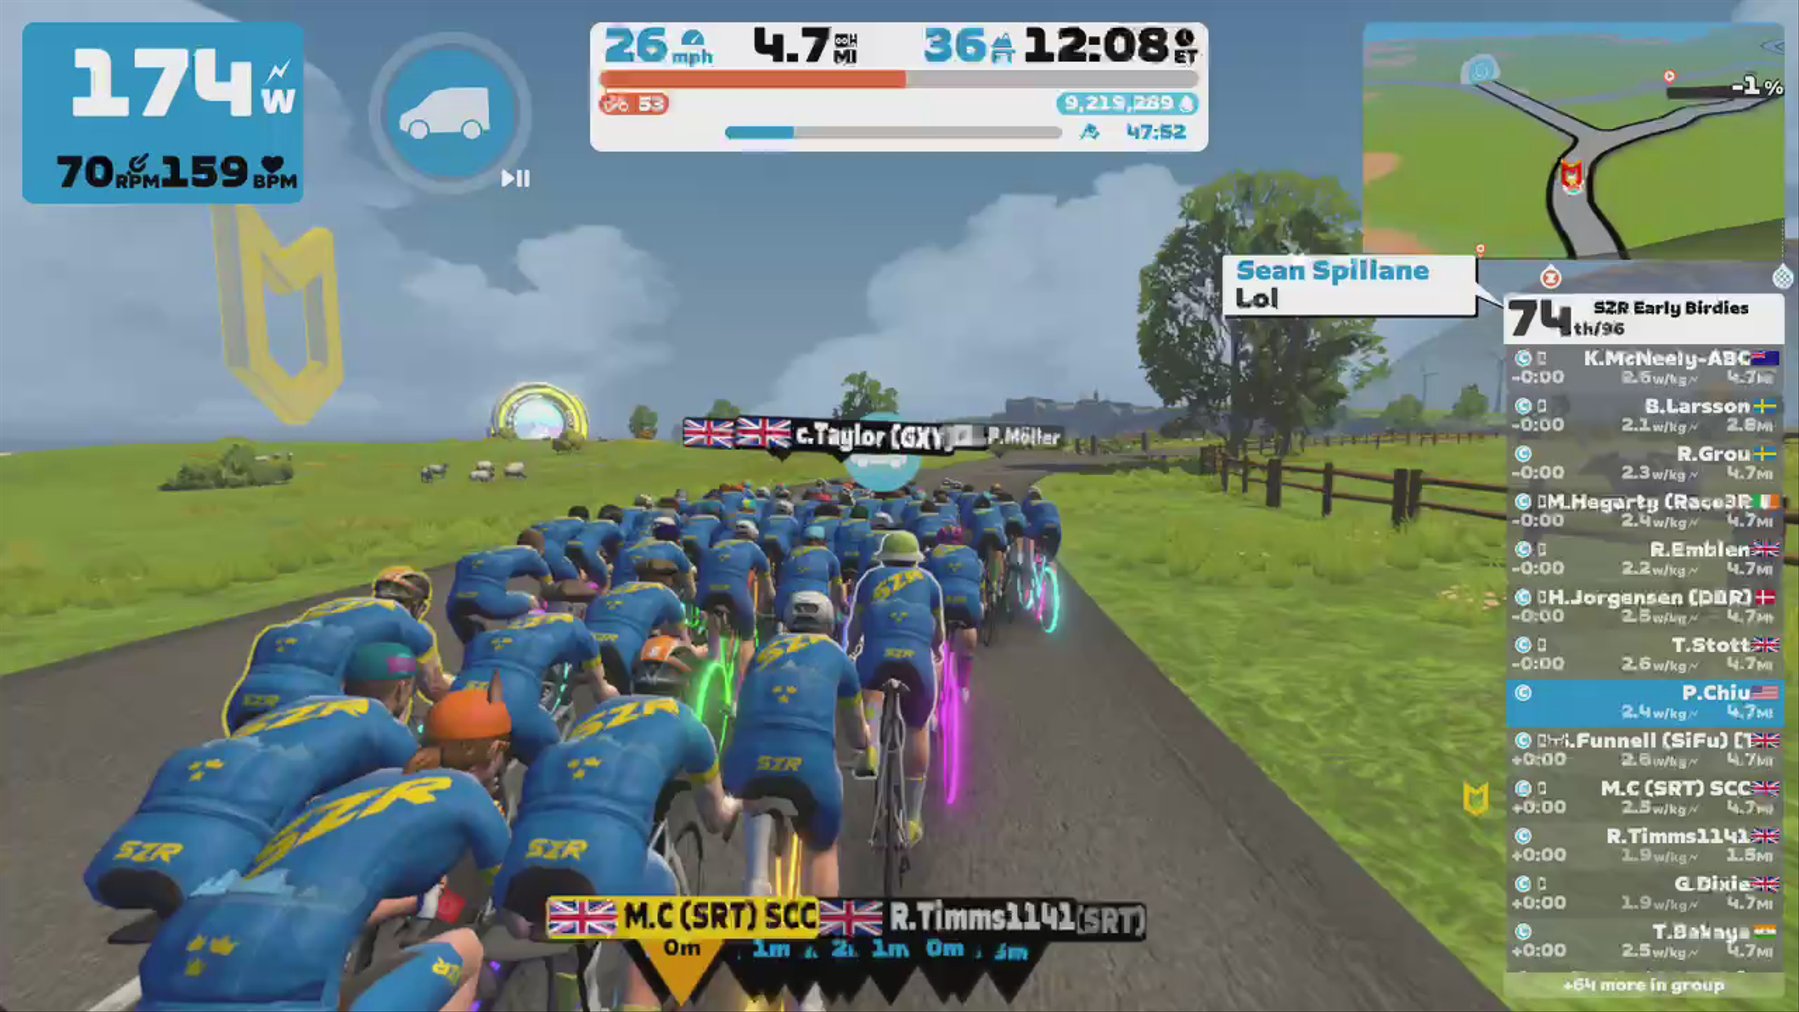 Zwift - Group Ride: SZR Early Birdies (C) on R.G.V. in France